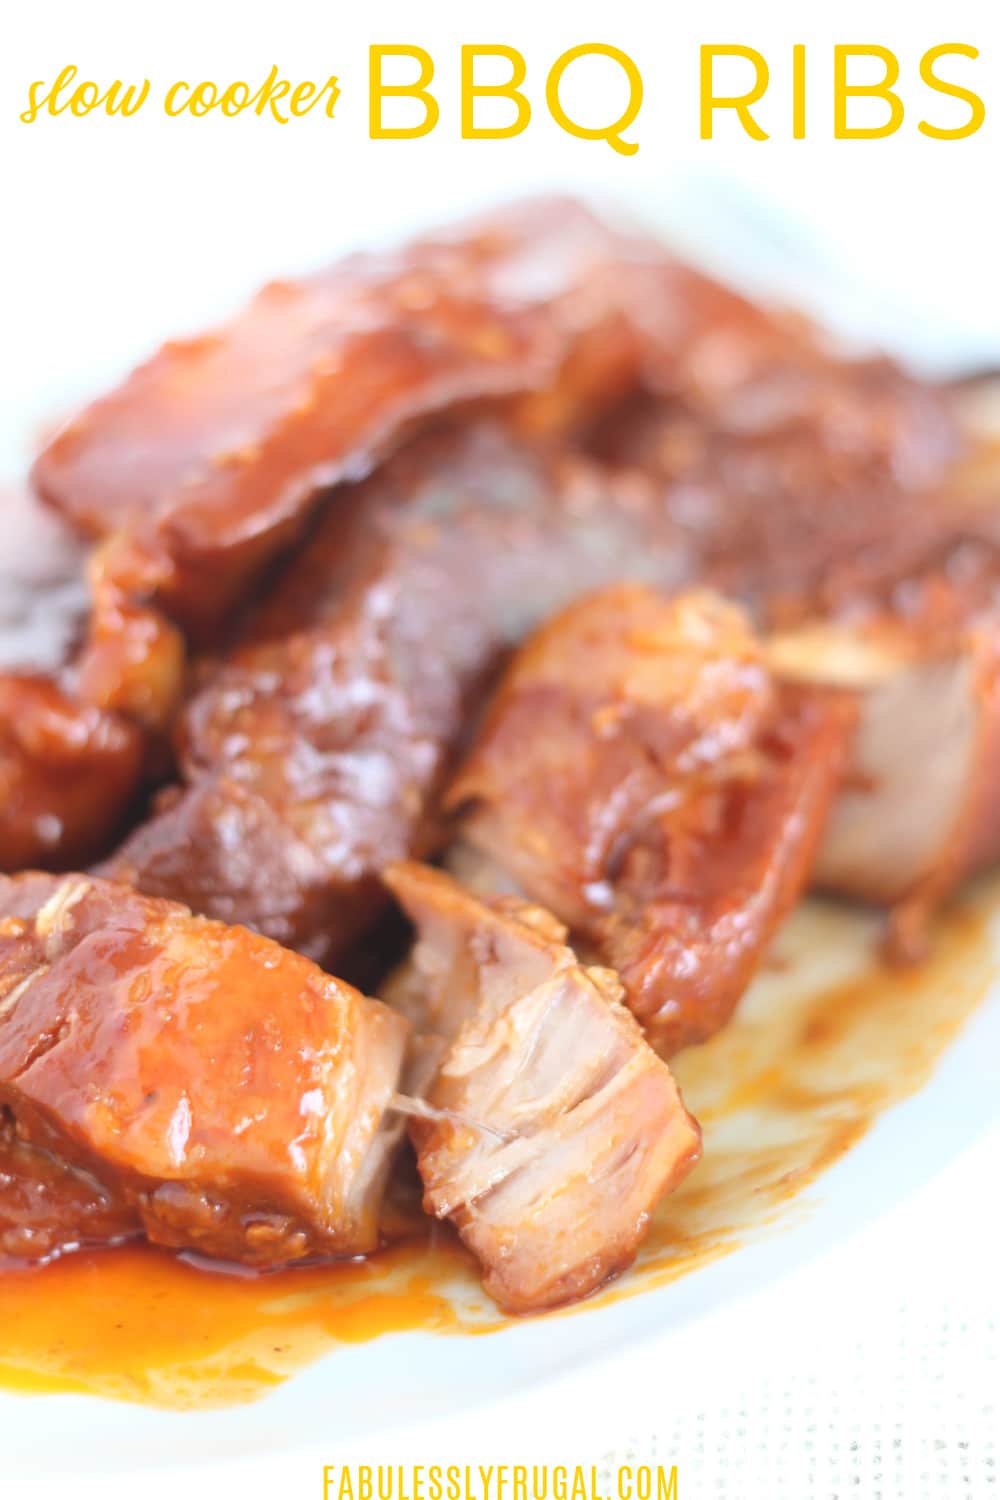 Slow cooker BBQ ribs